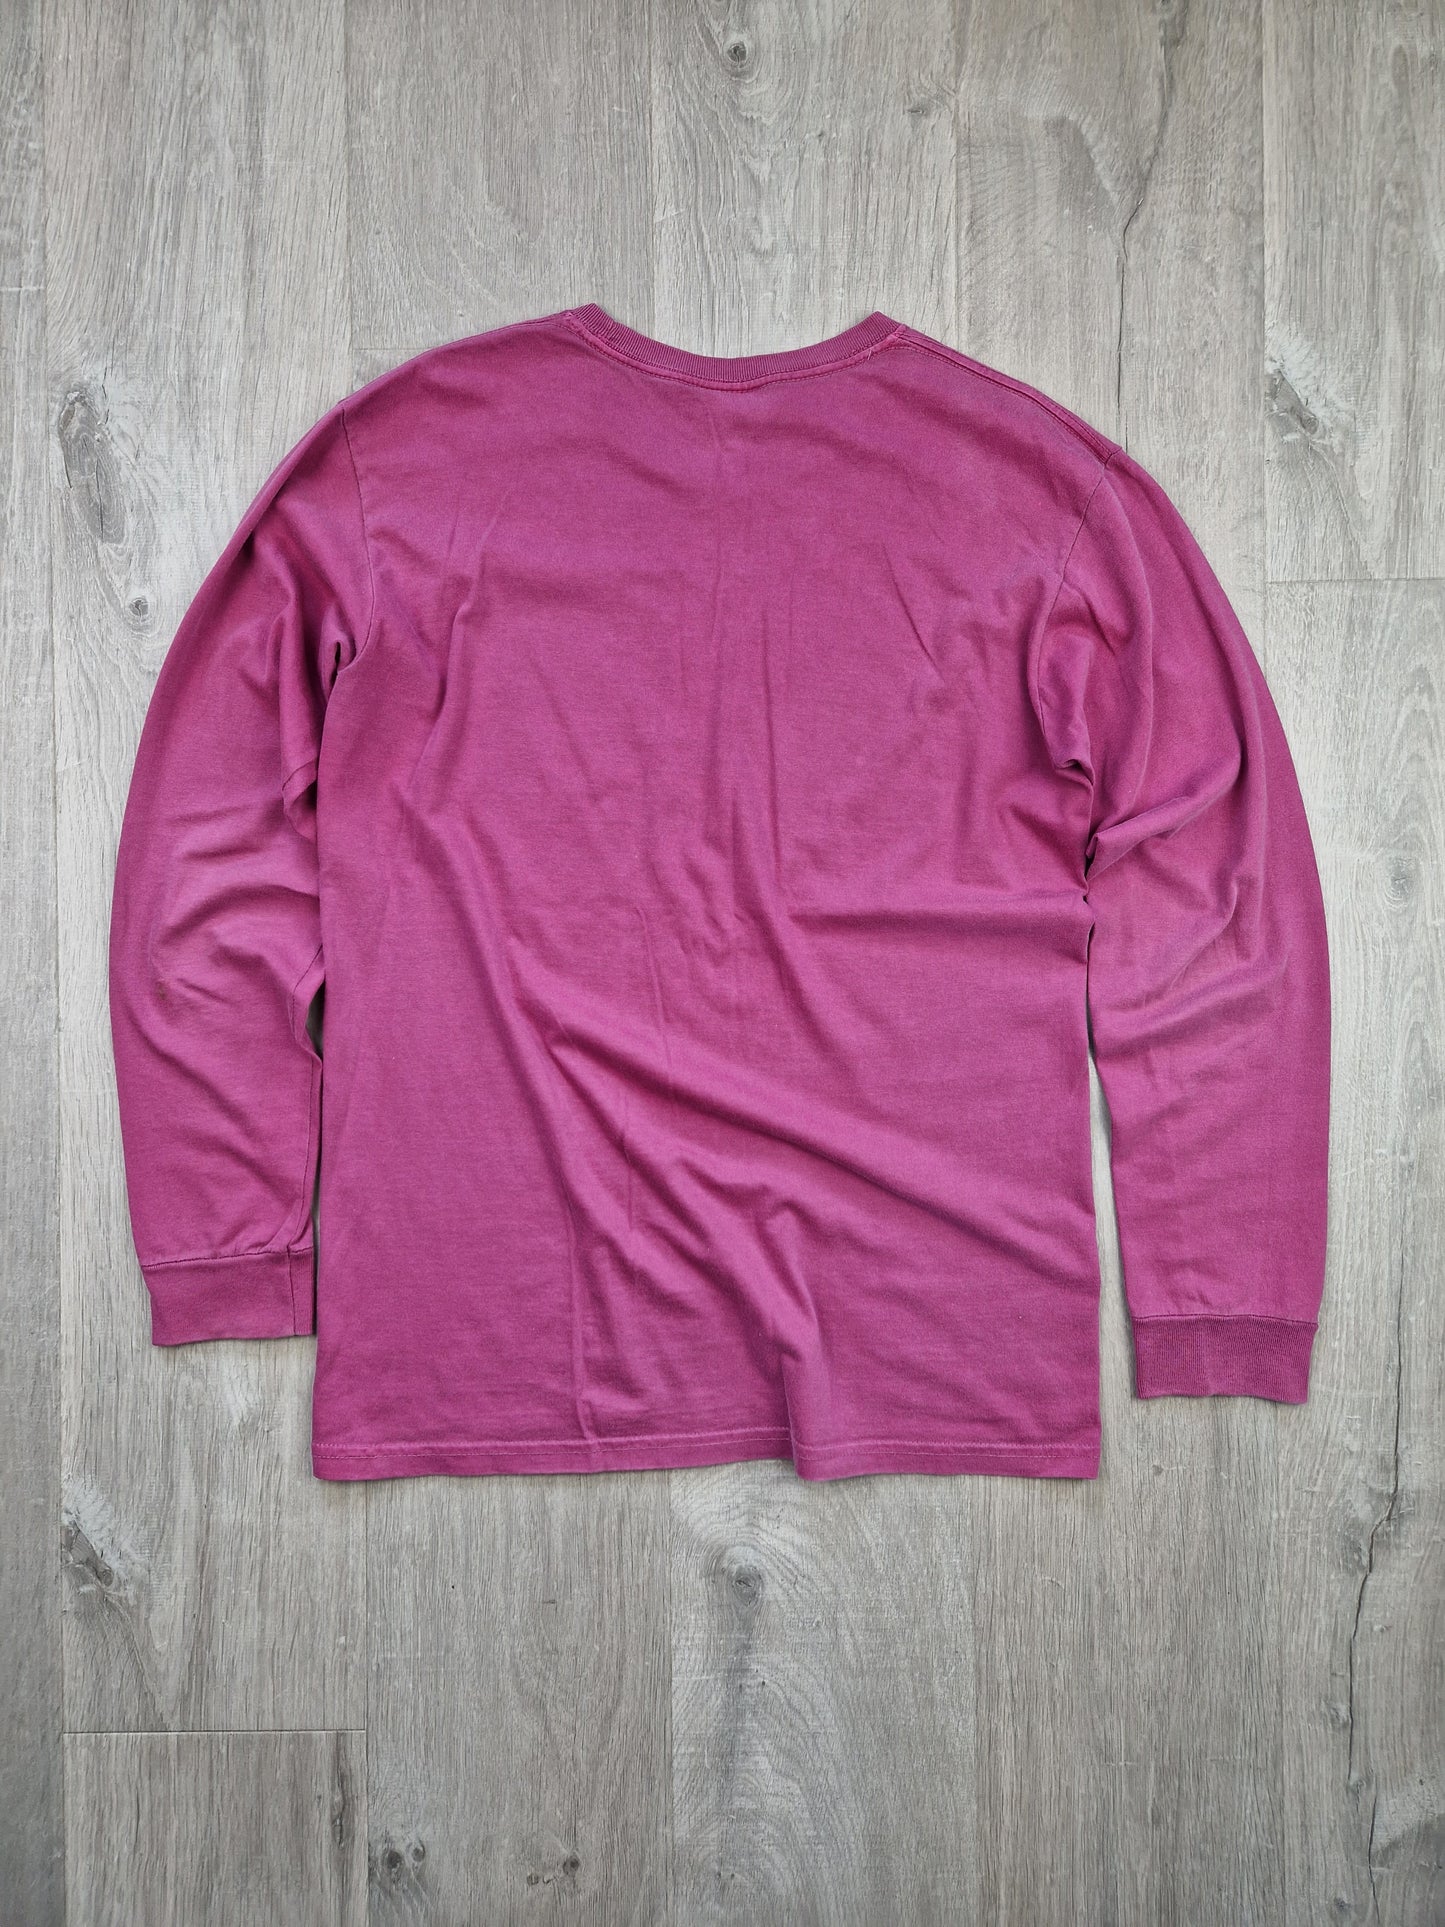 Stussy long sleeve over dyed tee (M)